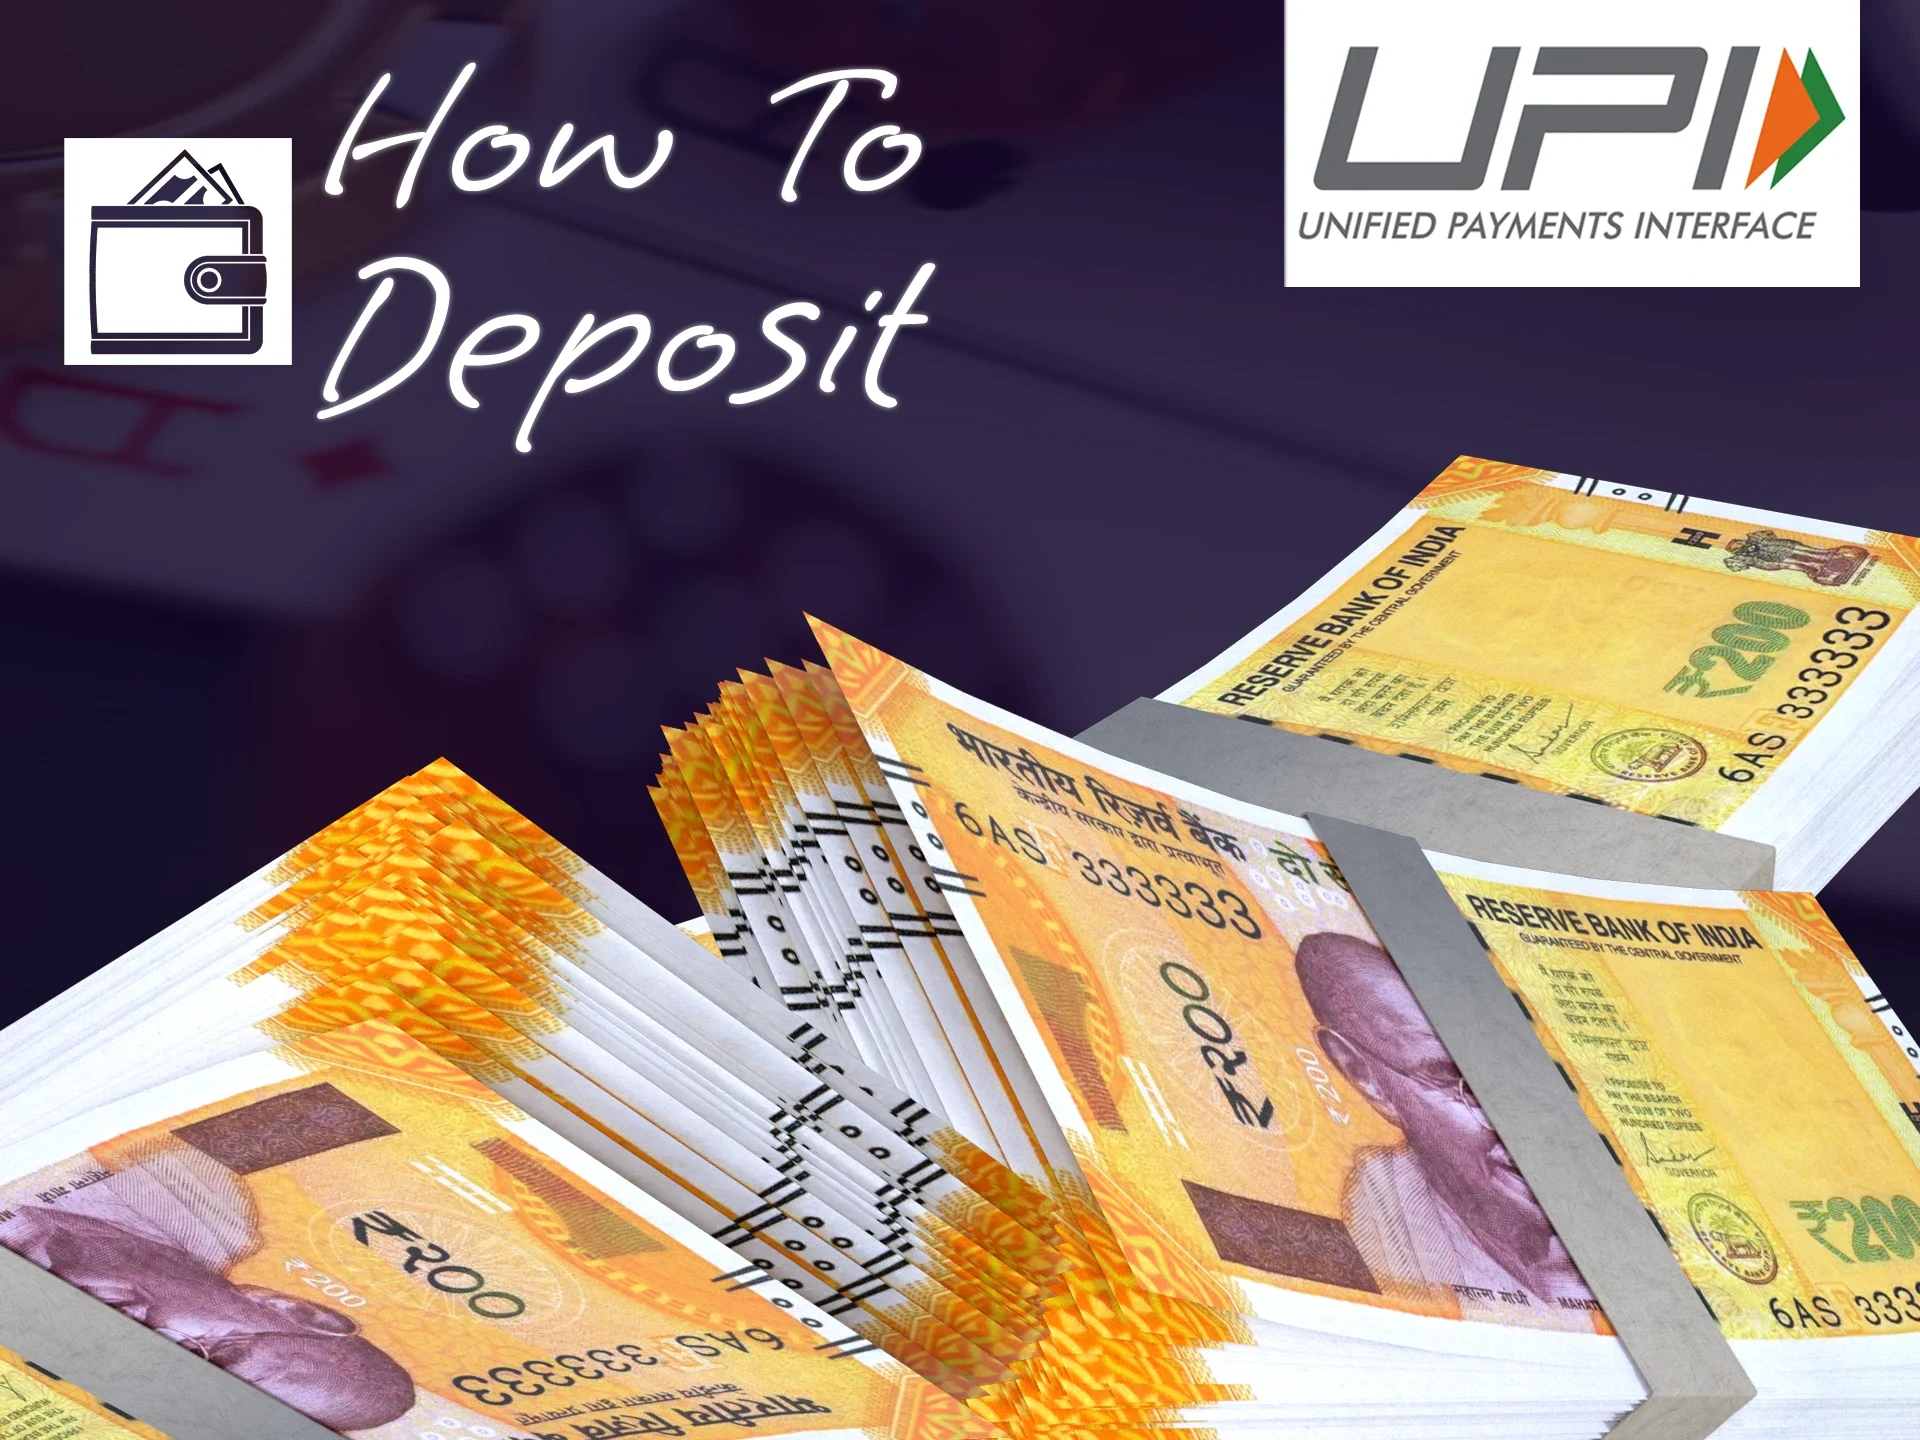 Make your first deposit using the UPI payment system.